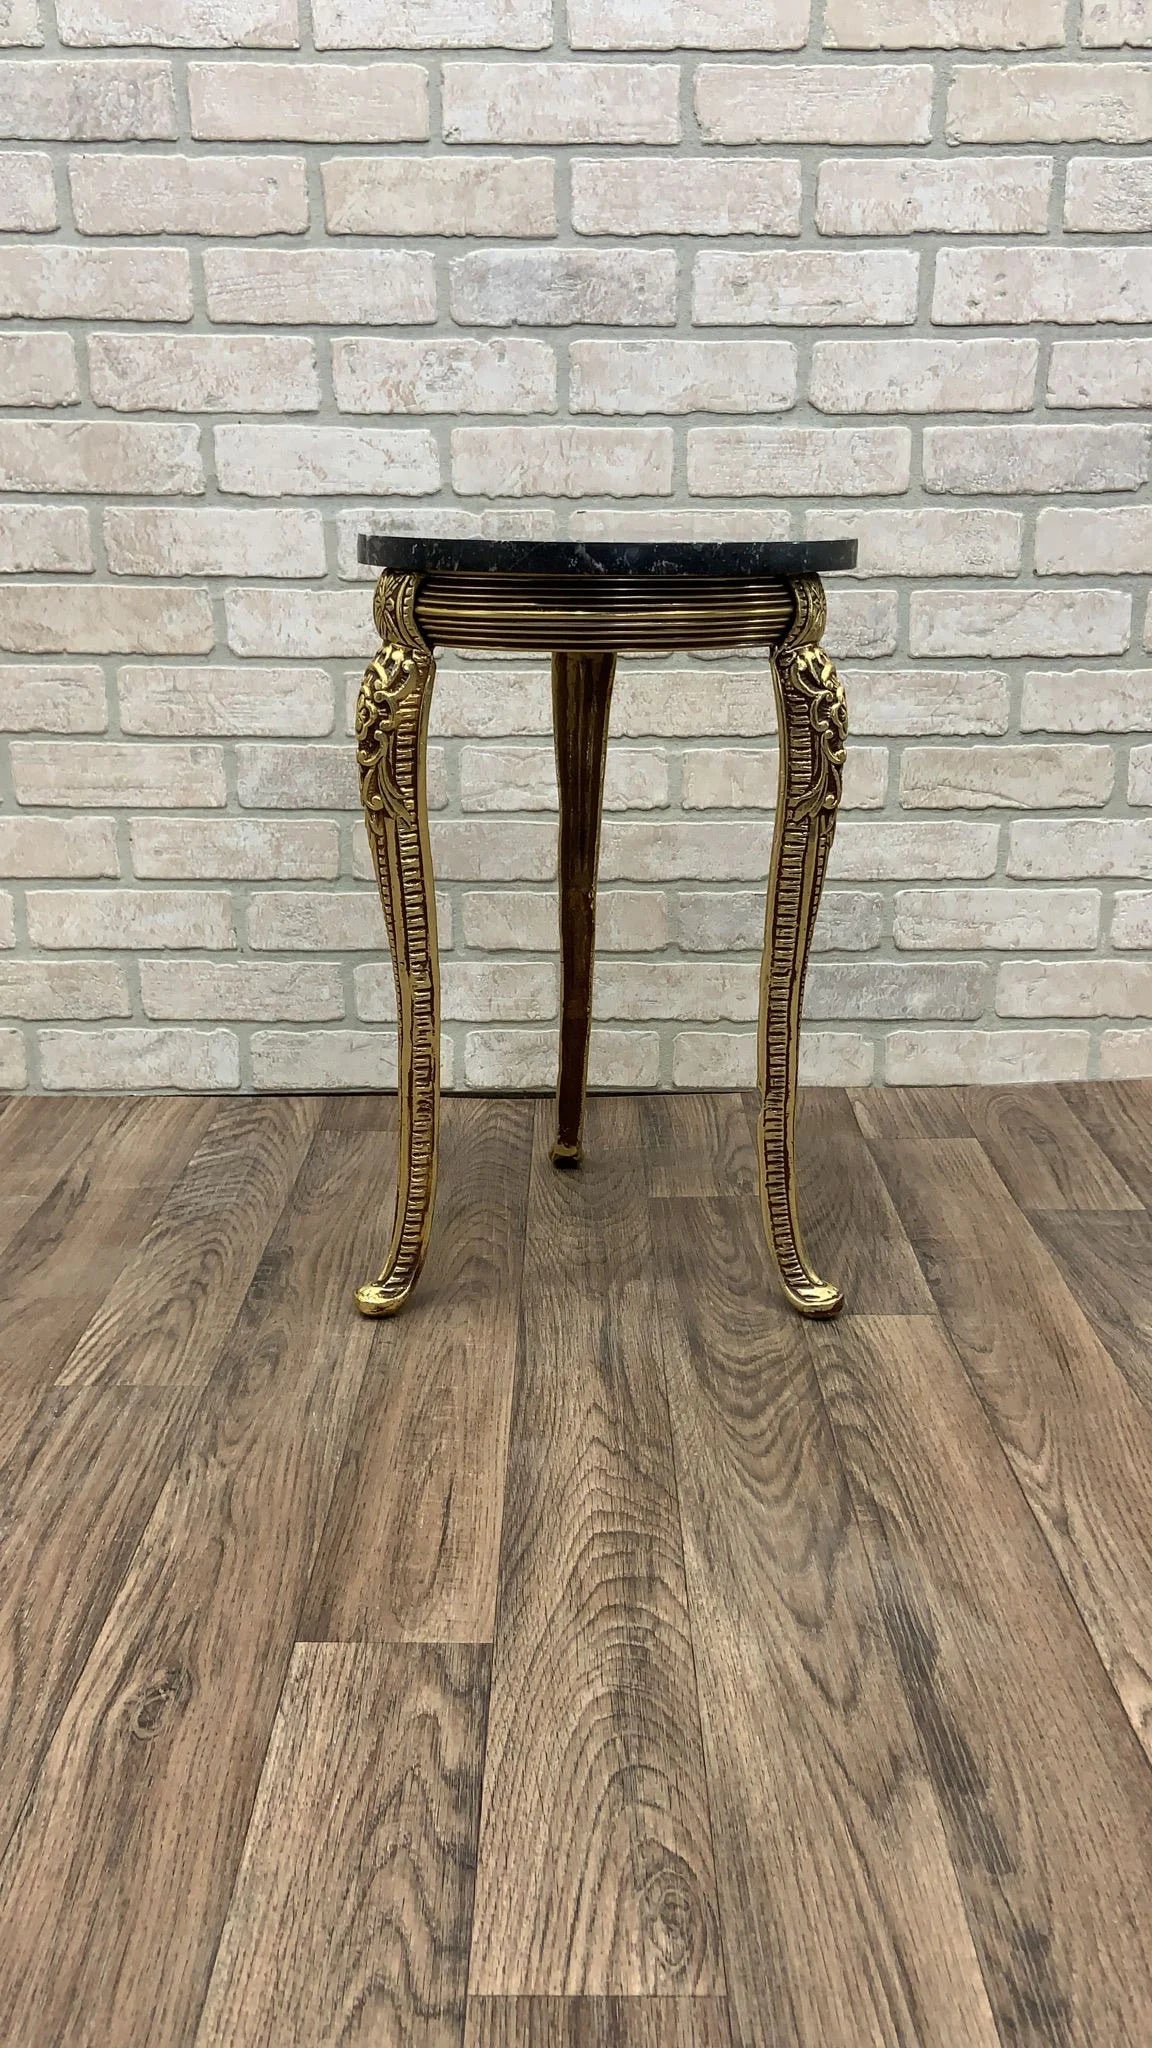 Vintage French Baroque Style Ornate Gilt-Bronze Base Marble Top Coffee Table with Round Marble Top Side-Table - Set of 2